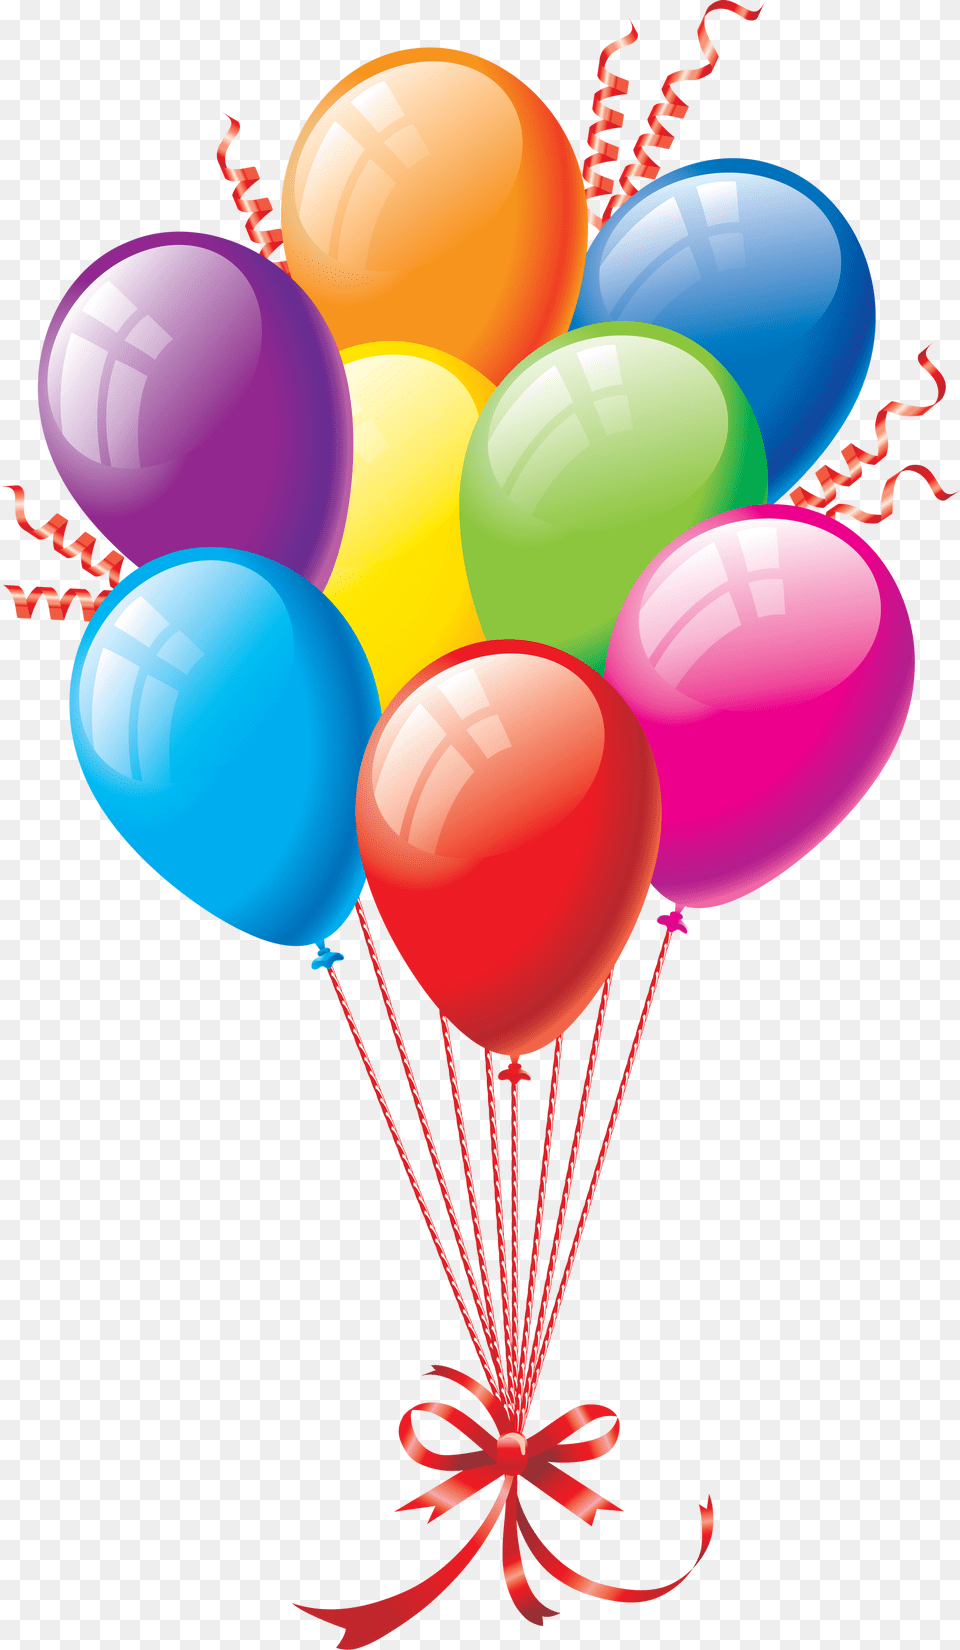 Image Result For Happy Birthday Balloons Clip Art Images, Balloon, Ball, Sport, Volleyball Free Png Download